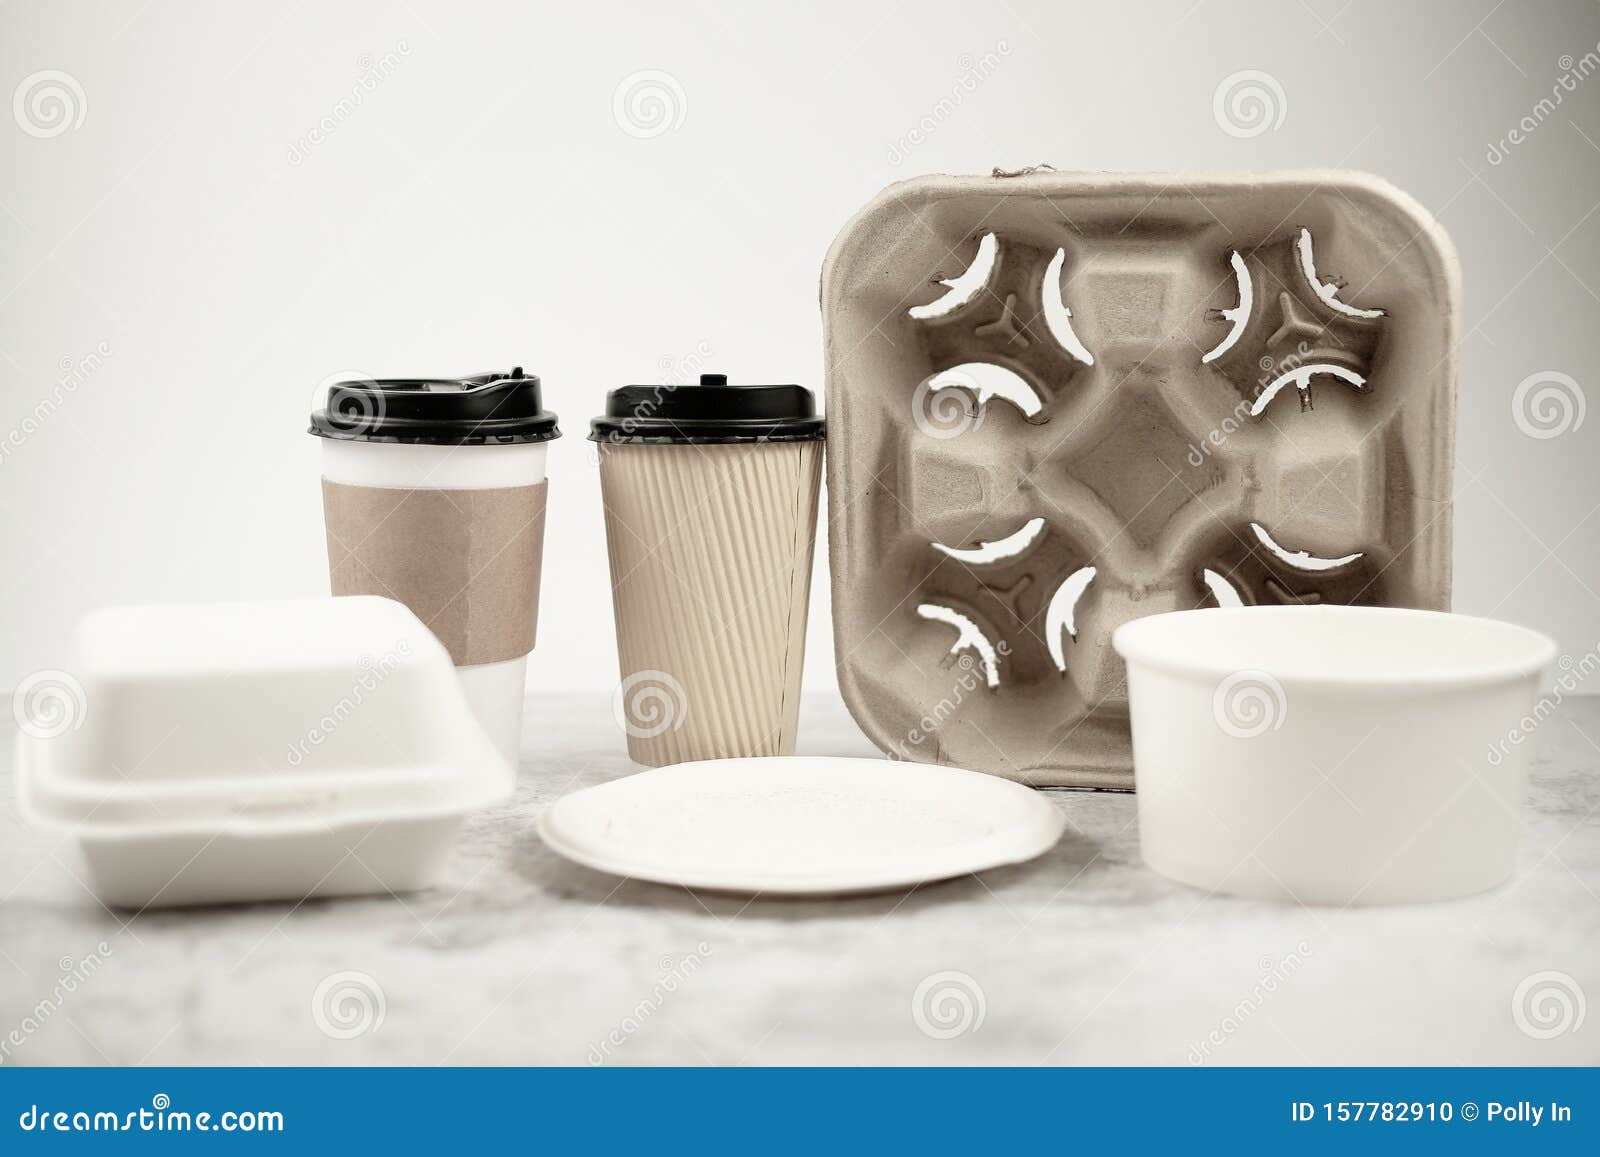 eco-friendly biodegradable coffee cup , box, blow, plate,straw made by paper and recycle packaging